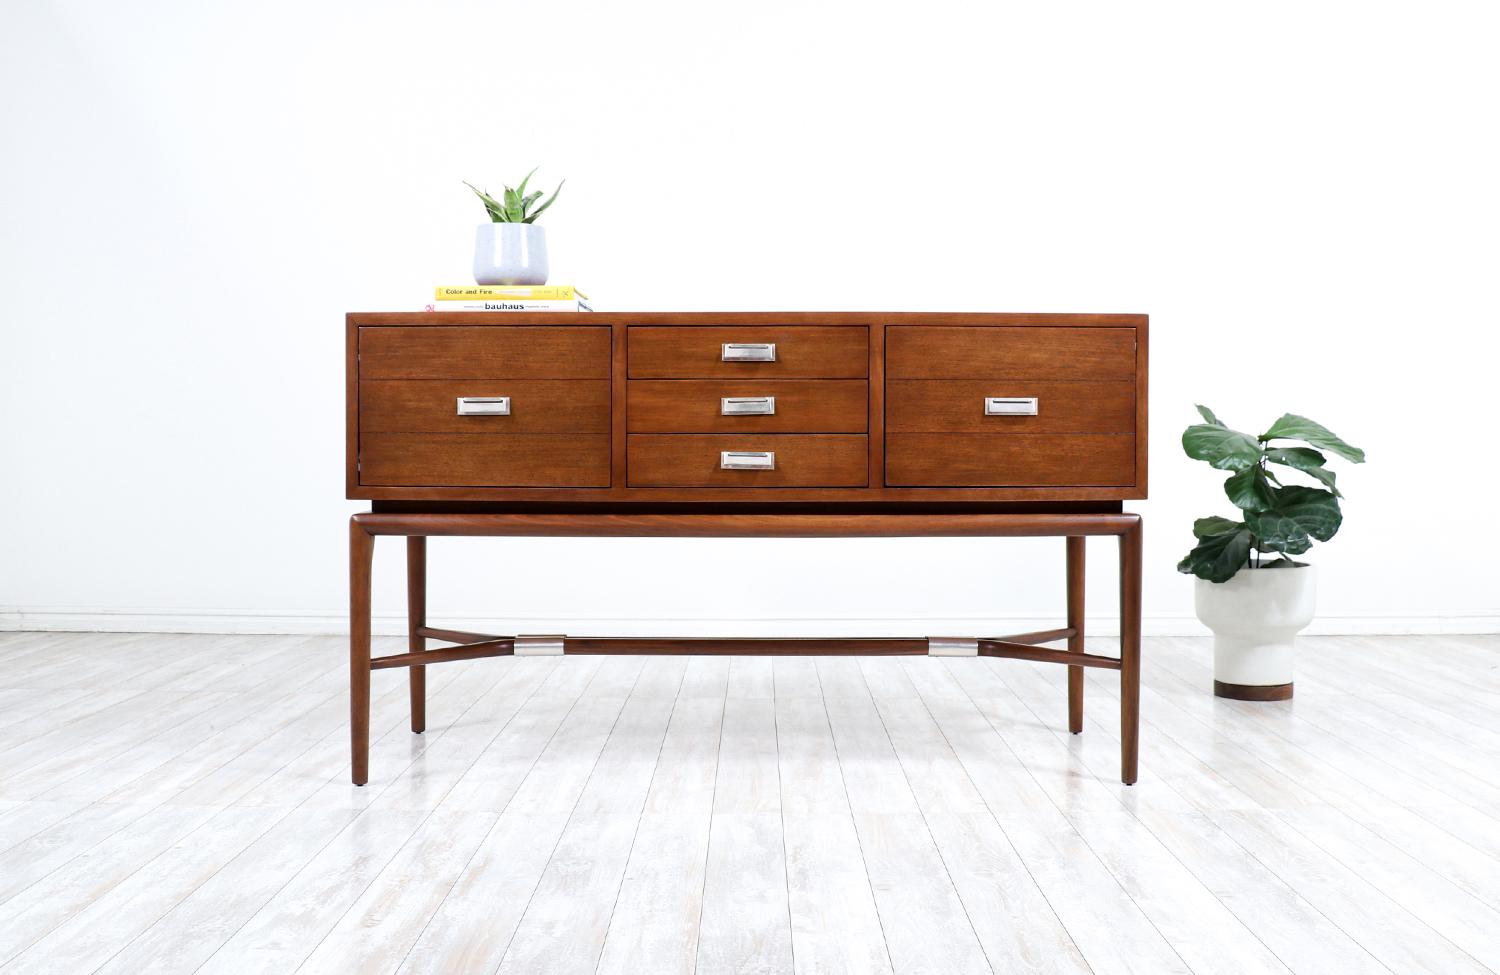 California modern console table by Maurice Bailey for Monteverdi-Young.

________________________________________

Transforming a piece of Mid-Century Modern furniture is like bringing history back to life, and we take this journey with passion and